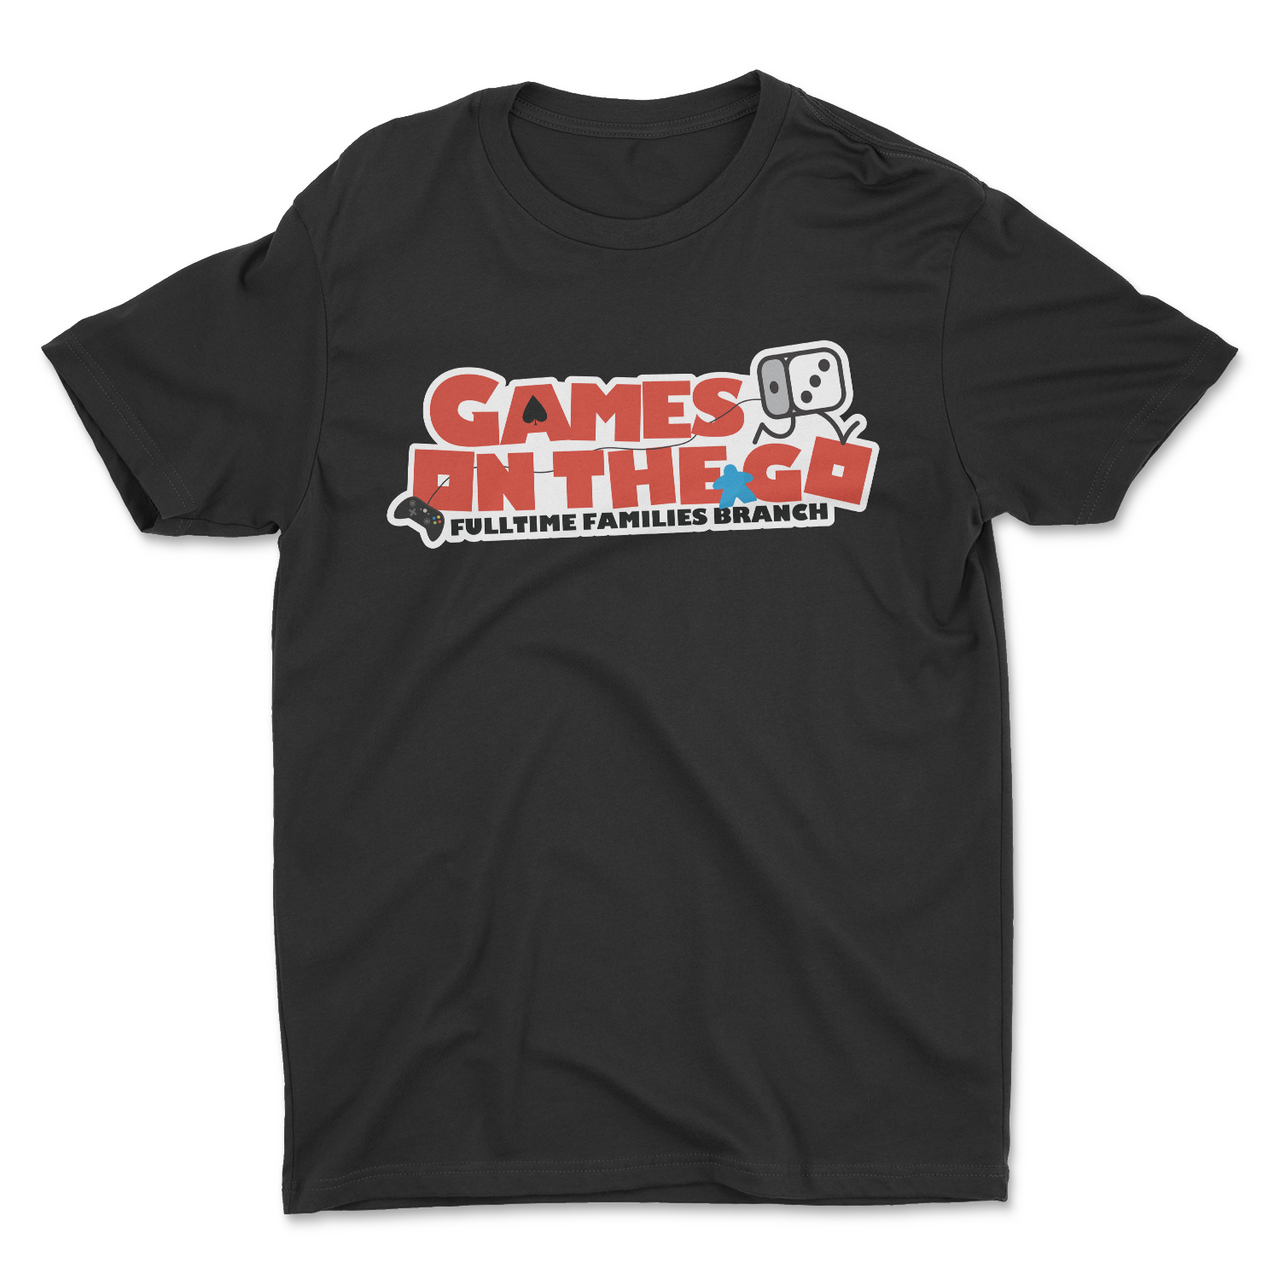 FTF Games on the Go Branch Kids Shirt